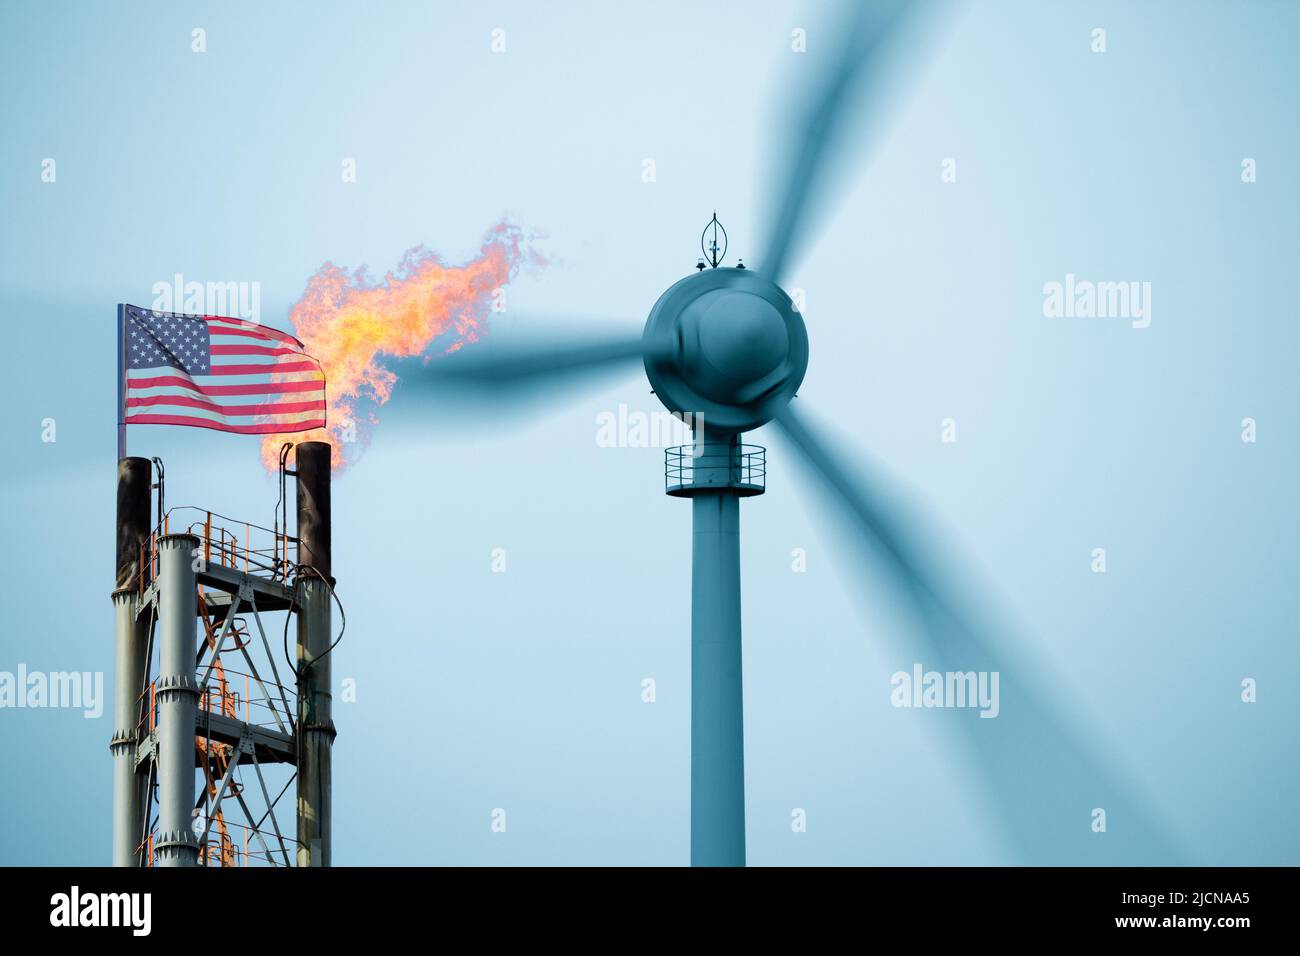 USA clean, renewable energy, fossil fuels, gas, oil industry, wind turbines, inflation, economy, net zero emissions, global warming, climate change.. Stock Photo